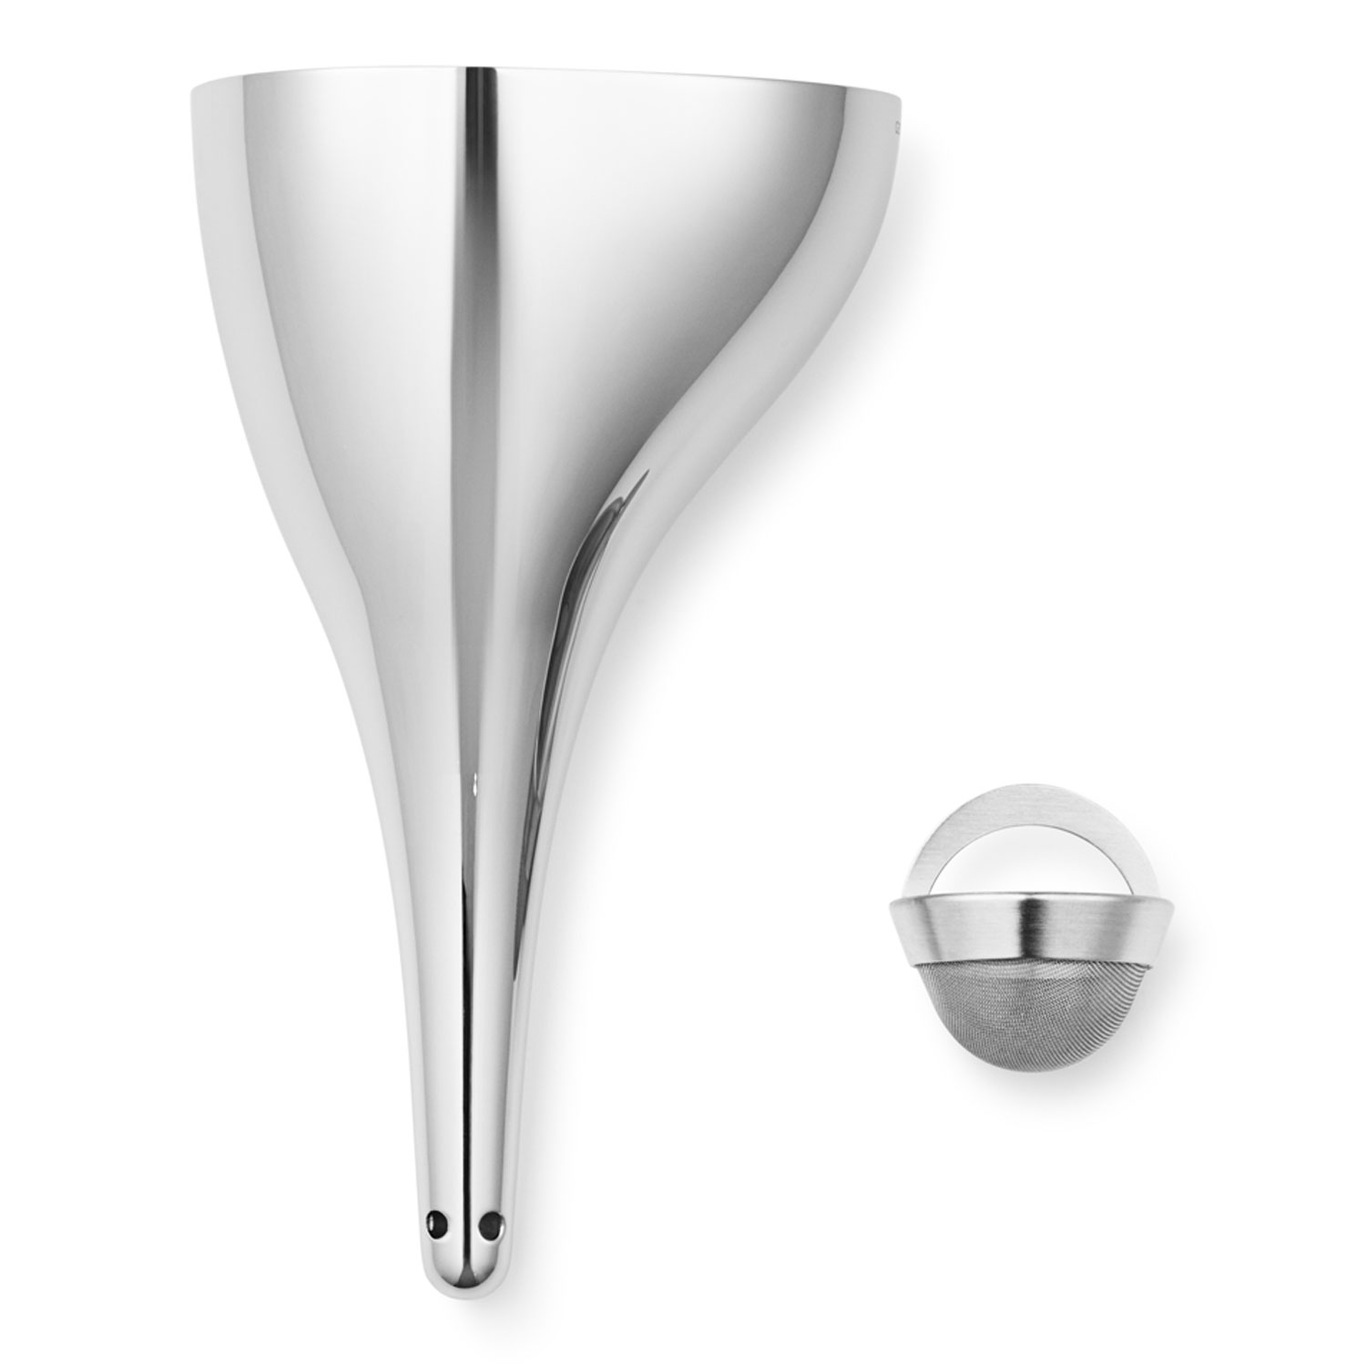 Sky Aerating Funnel, Stainless Steel